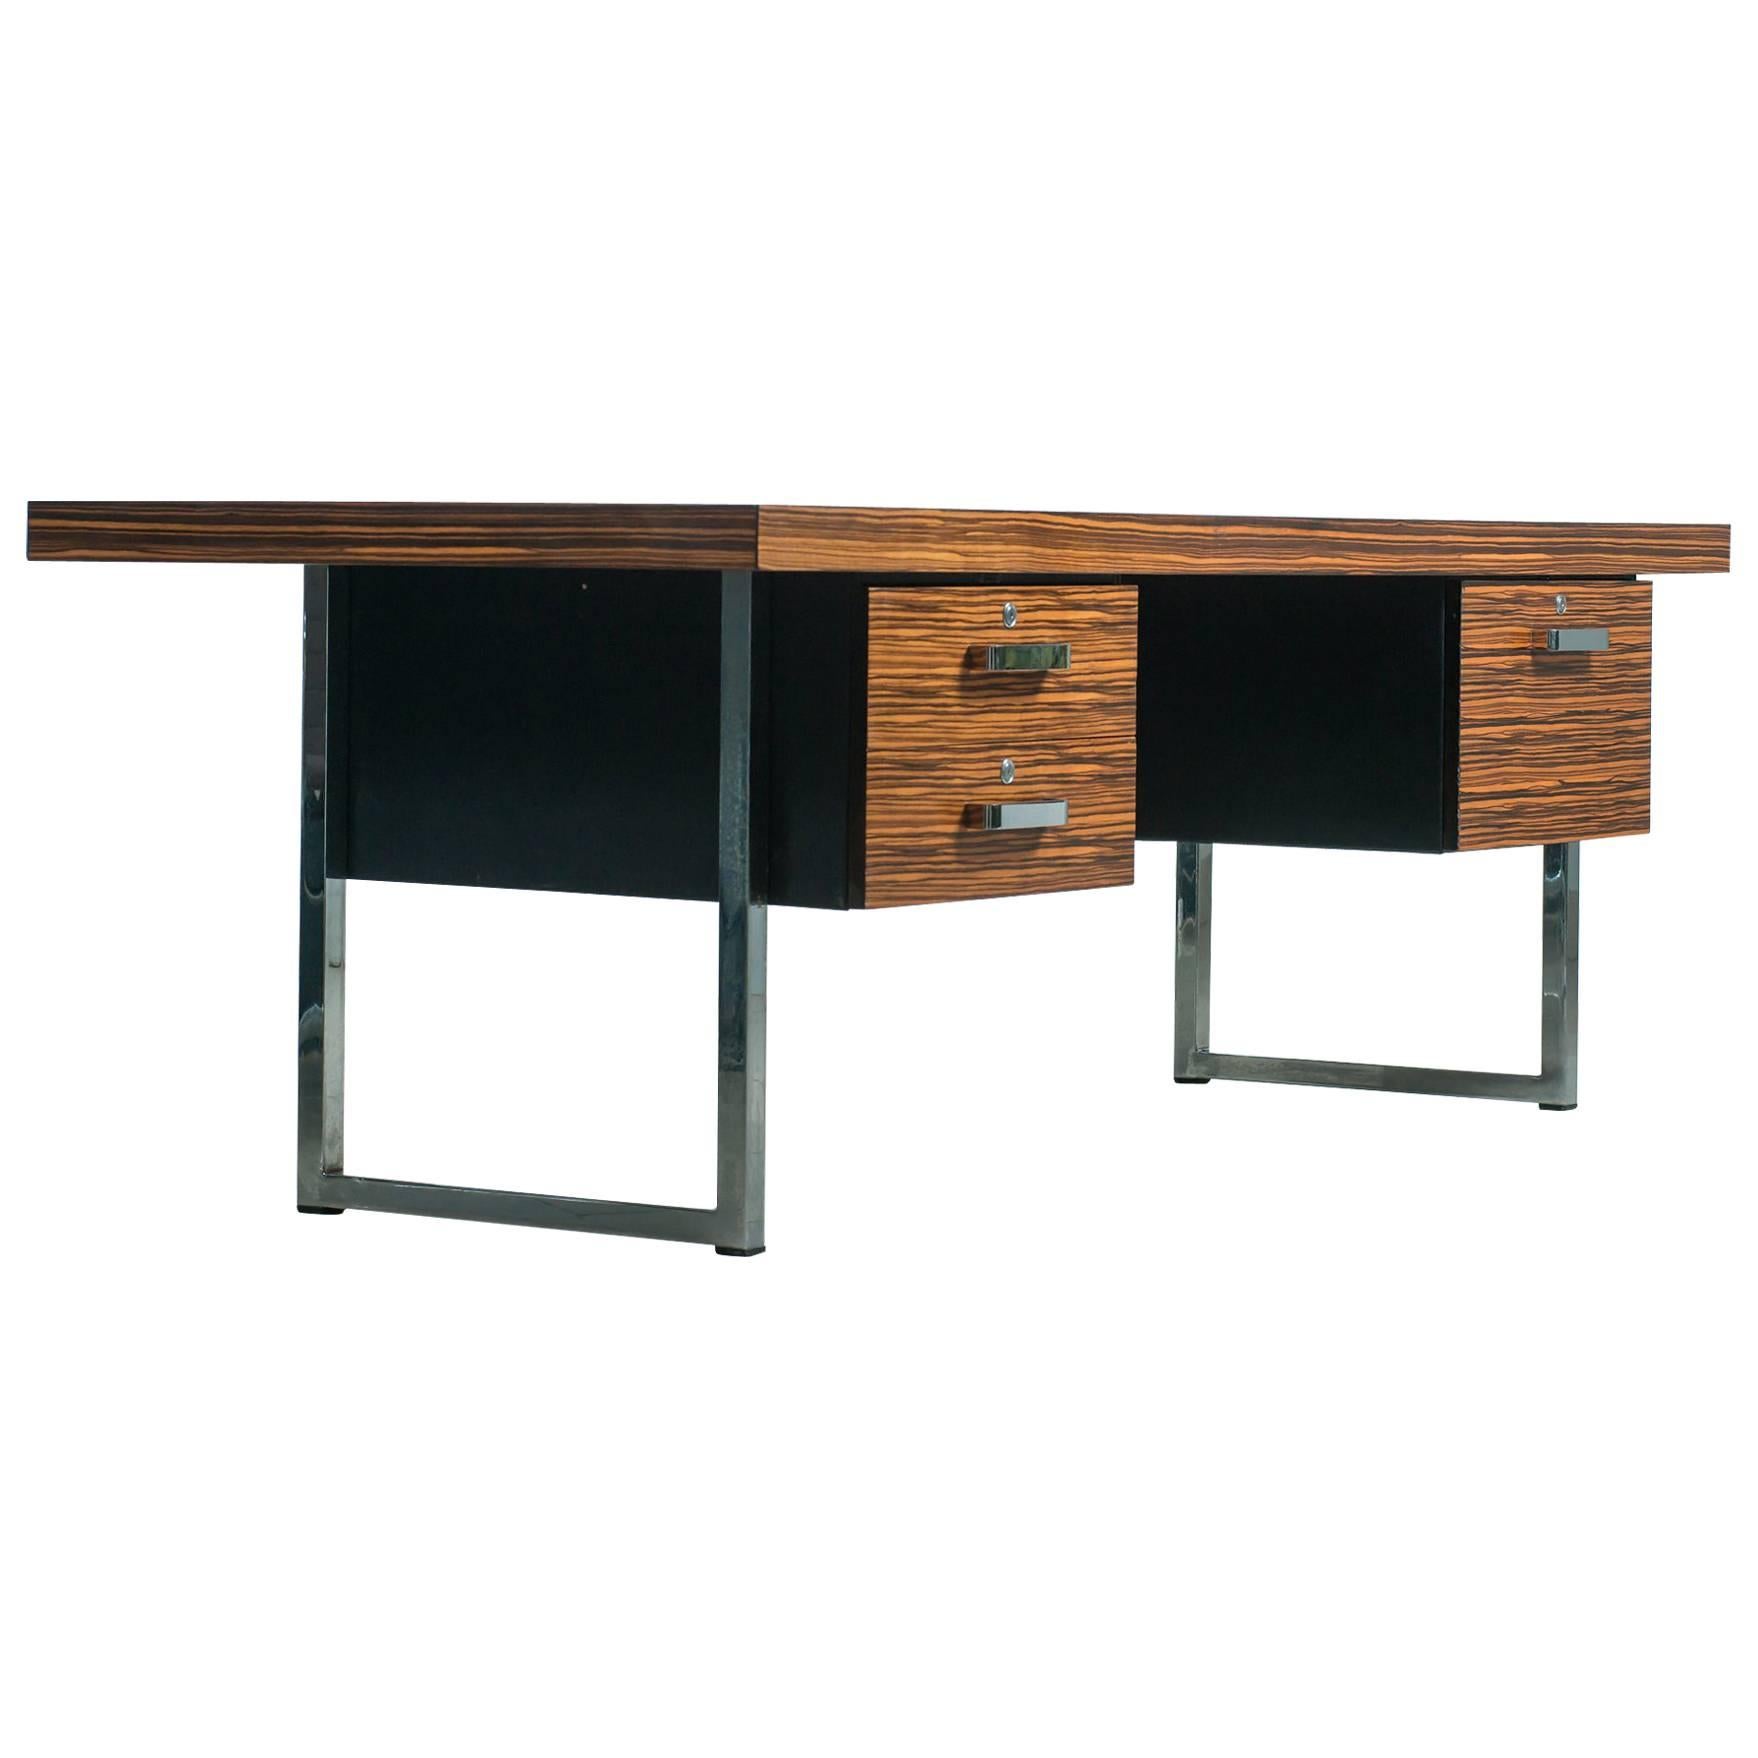 1960s Rosewood Executive Desk by Gordon Russell Ltd